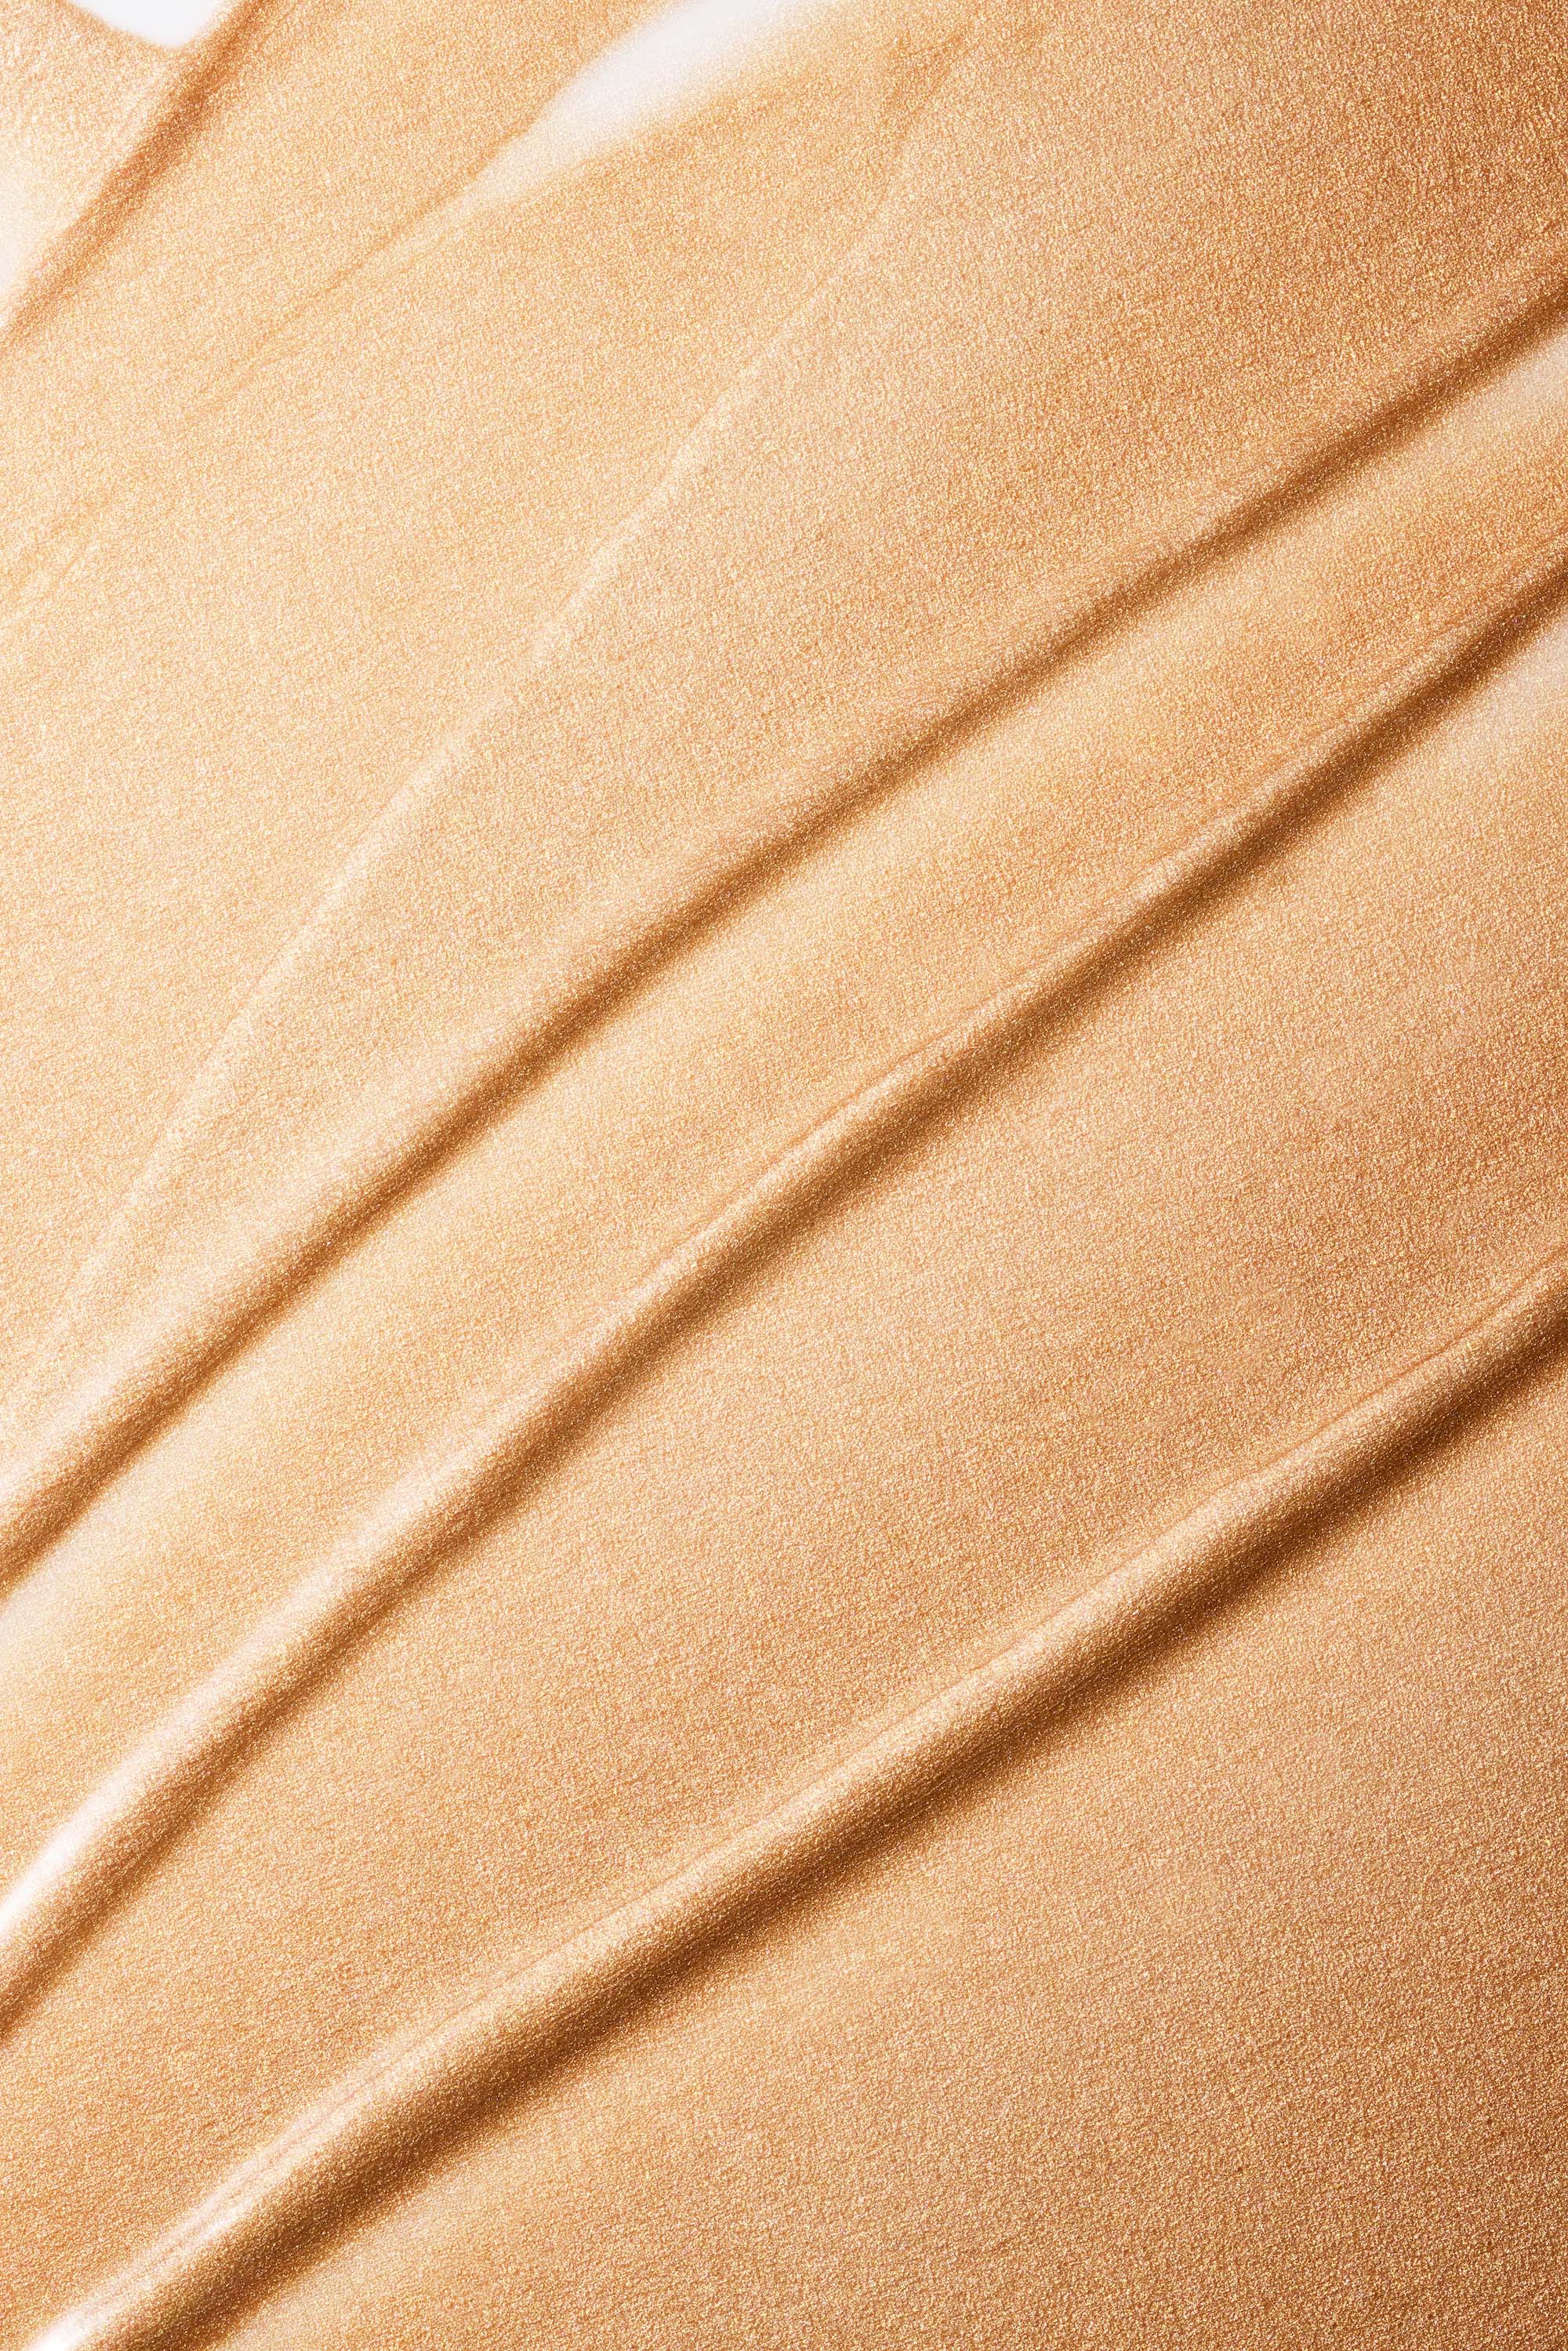 Hyper Shine High Lite Kit close up swatch of product - Lite Gold